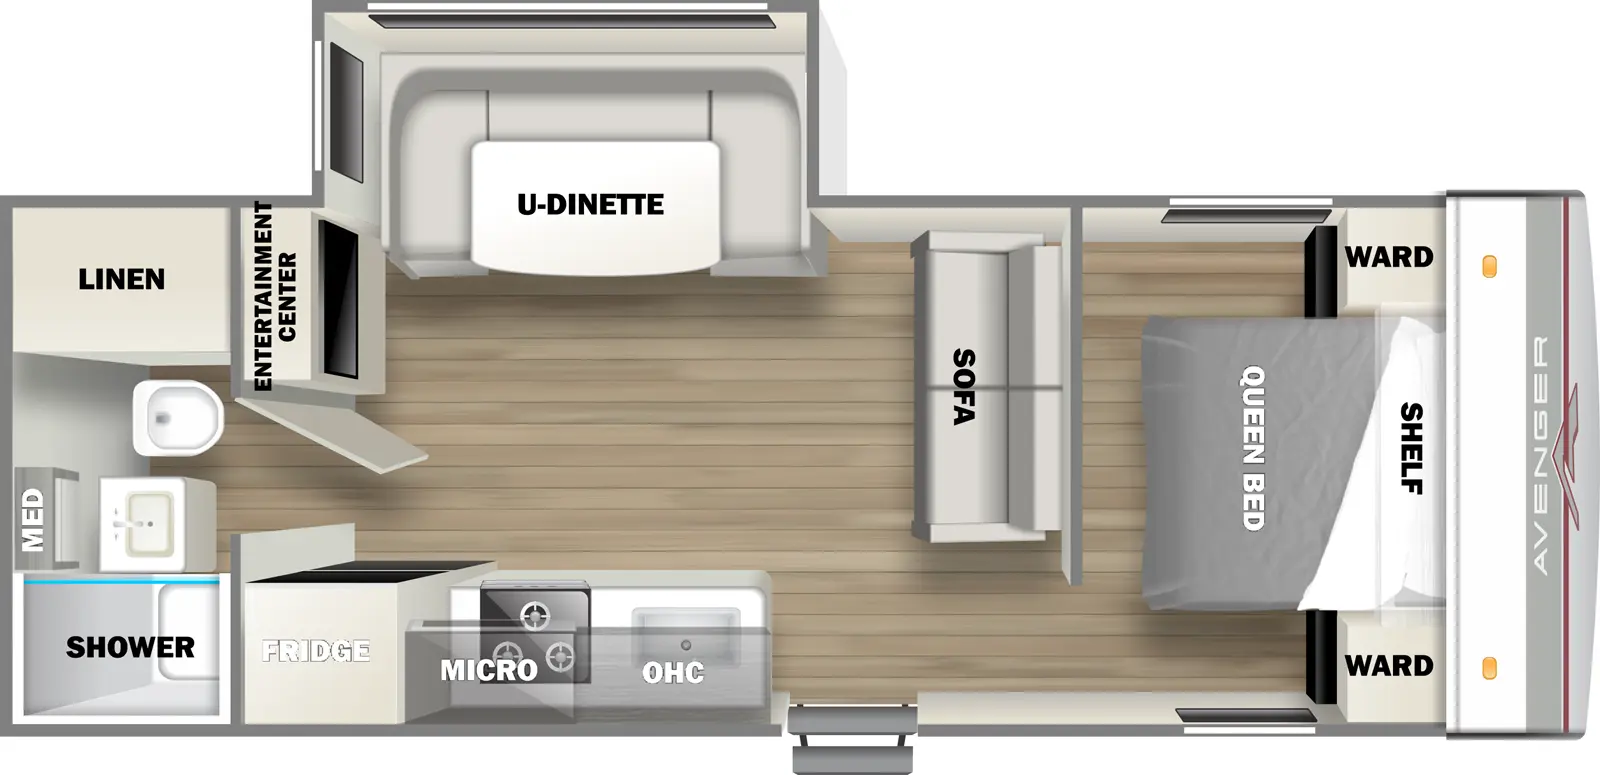 The 21RBSLE has one slideout and one entry. Interior layout front to back: foot facing queen bed with shelf above and wardrobes on each side; sofa along inner wall; off-door side slideout with u-dinette; door side entry, kitchen counter with sink, overhead cabinet, microwave, cooktop, and refrigerator; entertainment center along inner wall opposite sofa; rear full bathroom with medicine cabinet and linen closet.